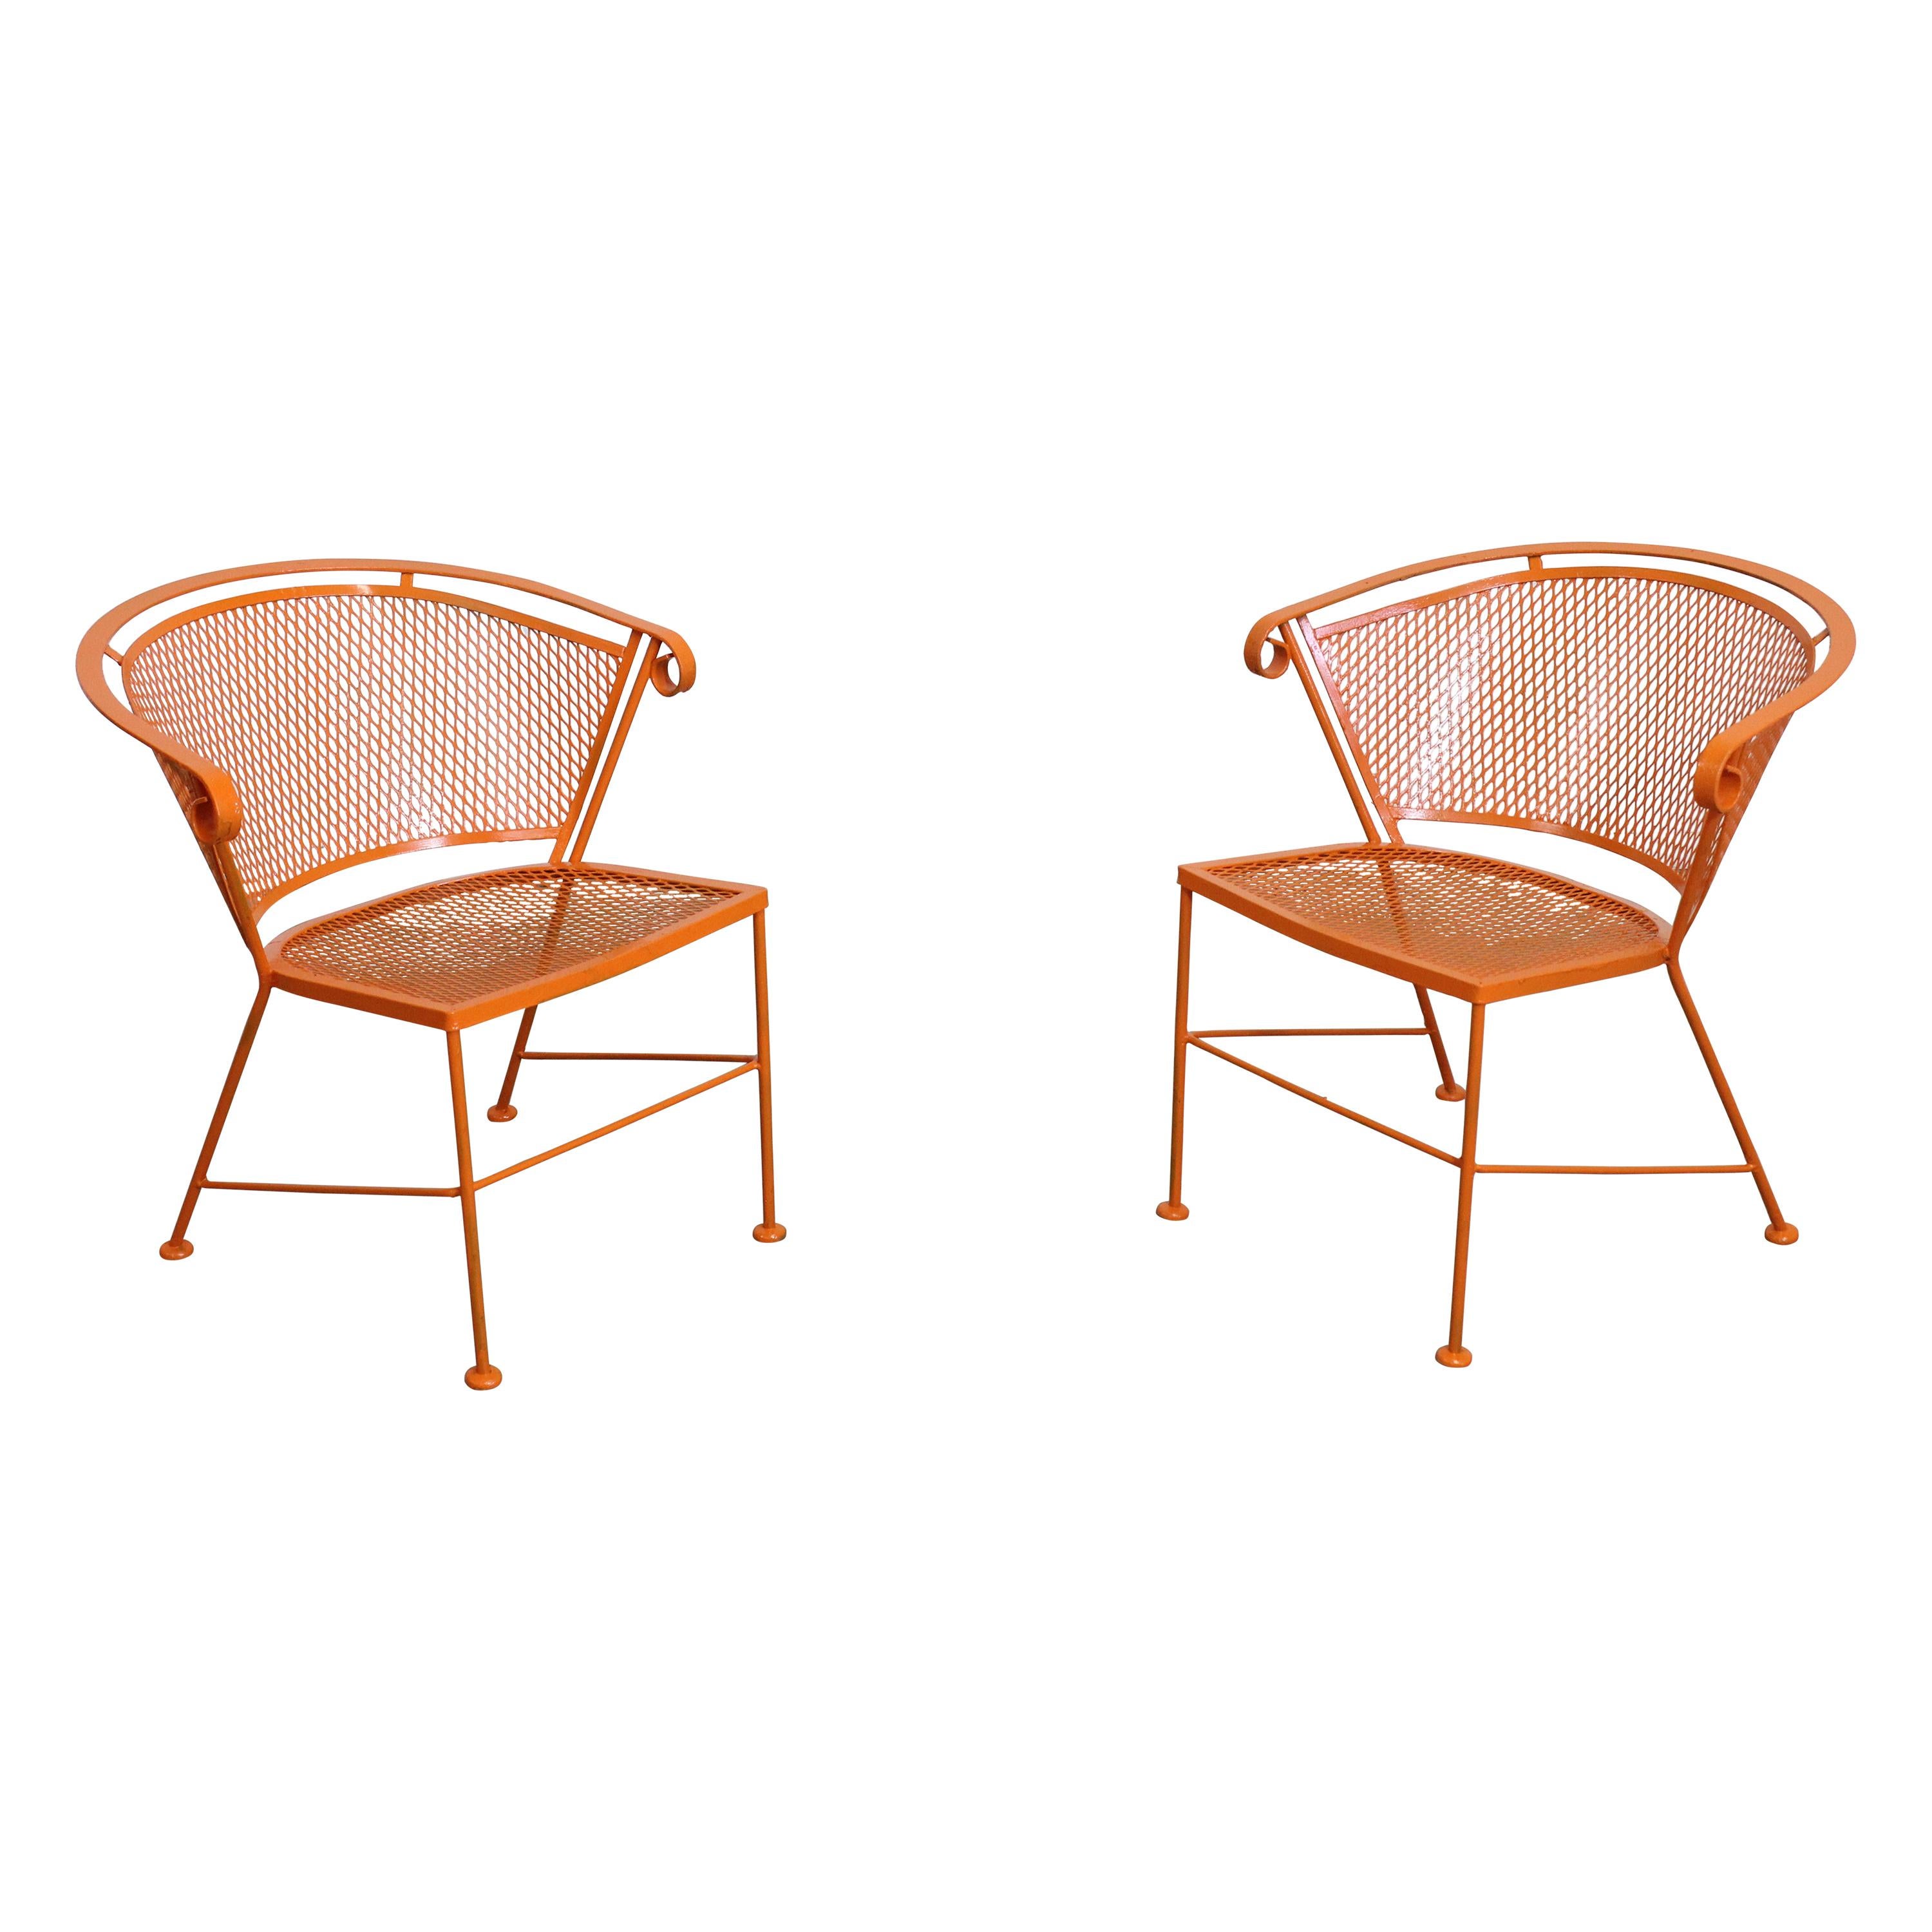 Pair of Mid-Century Modern Atomic Orange Outdoor Metal Curved Back Chairs